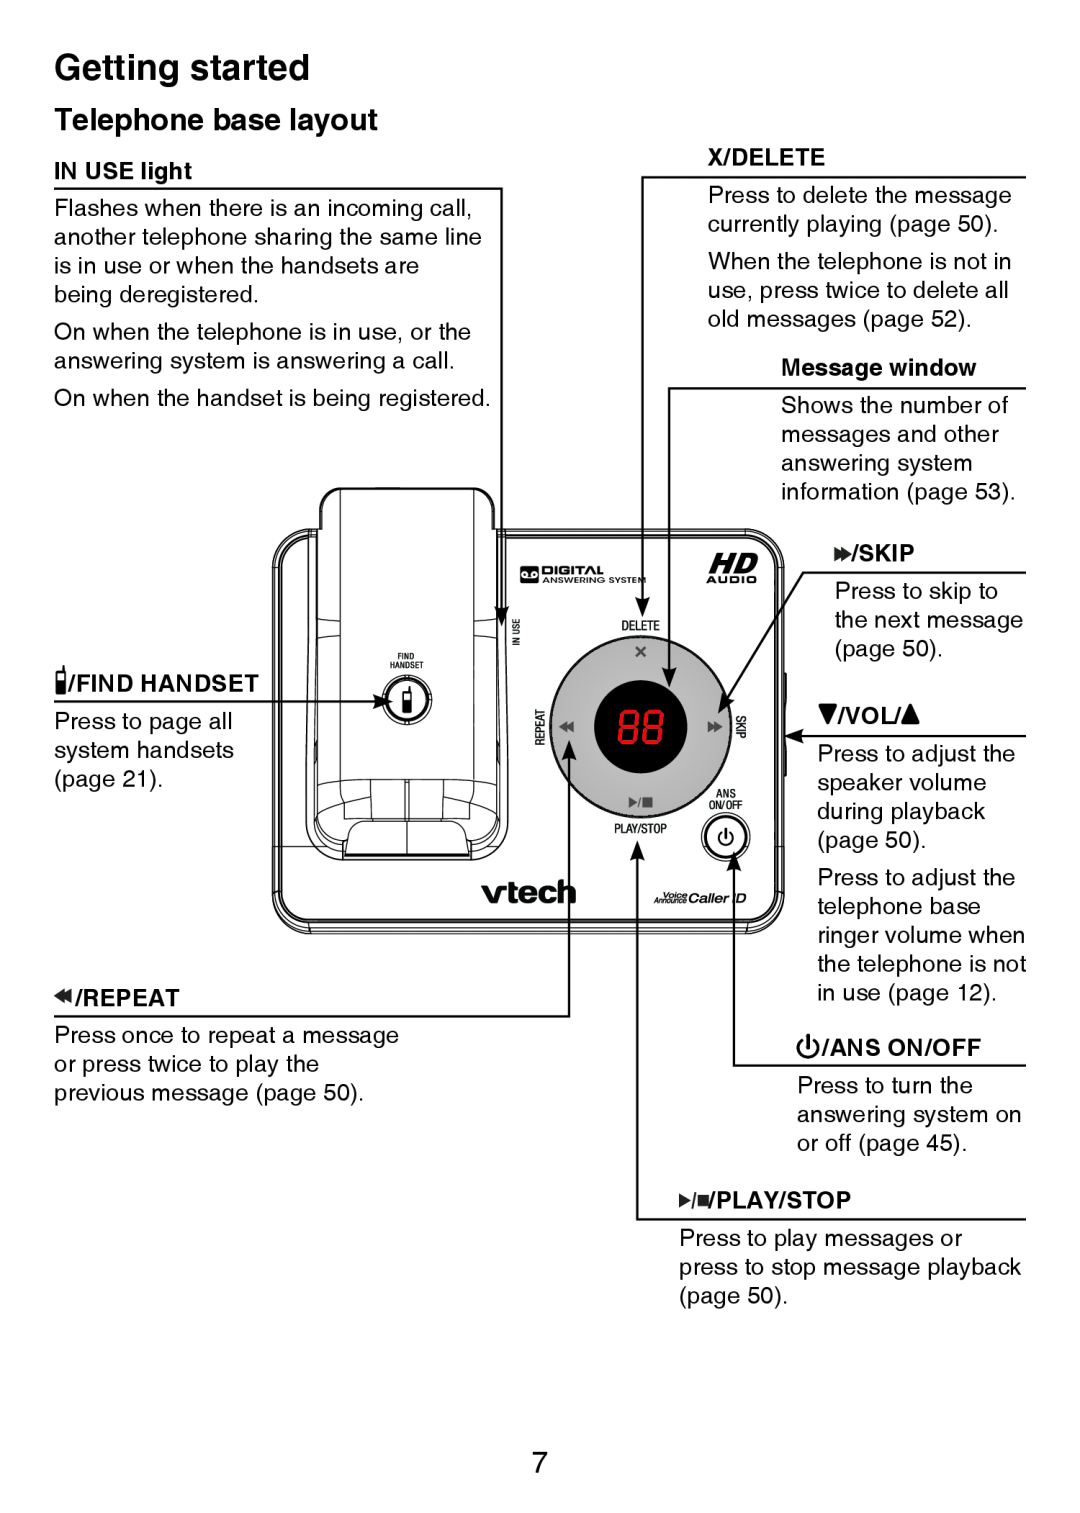 VTech LS6425-2 Telephone base layout, Getting started, IN USE light, Find Handset, Repeat, X/Delete, Message window, Skip 